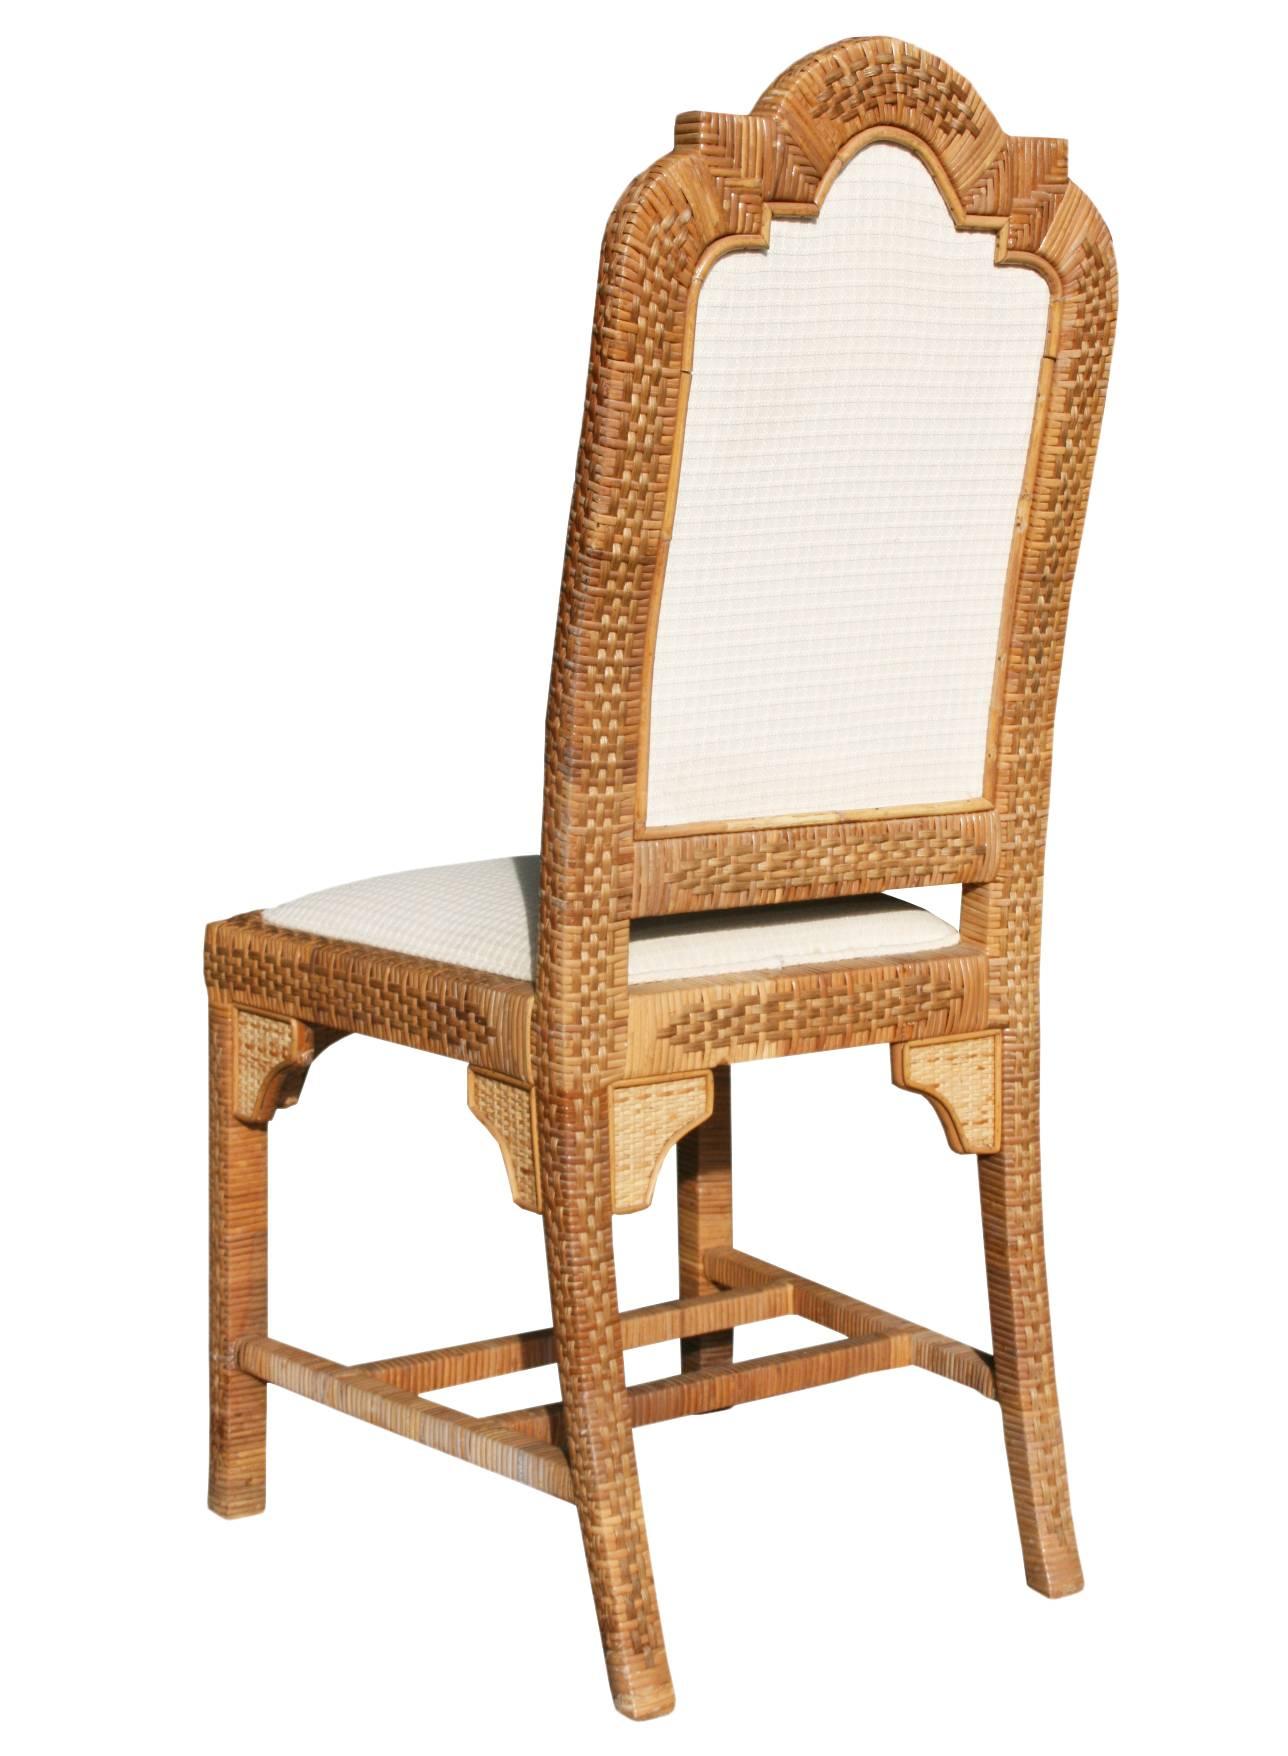 1980s Six-Piece Seating Set, Solid Wood Frames Lined with Interlaced Wicker In Good Condition For Sale In Marbella, ES